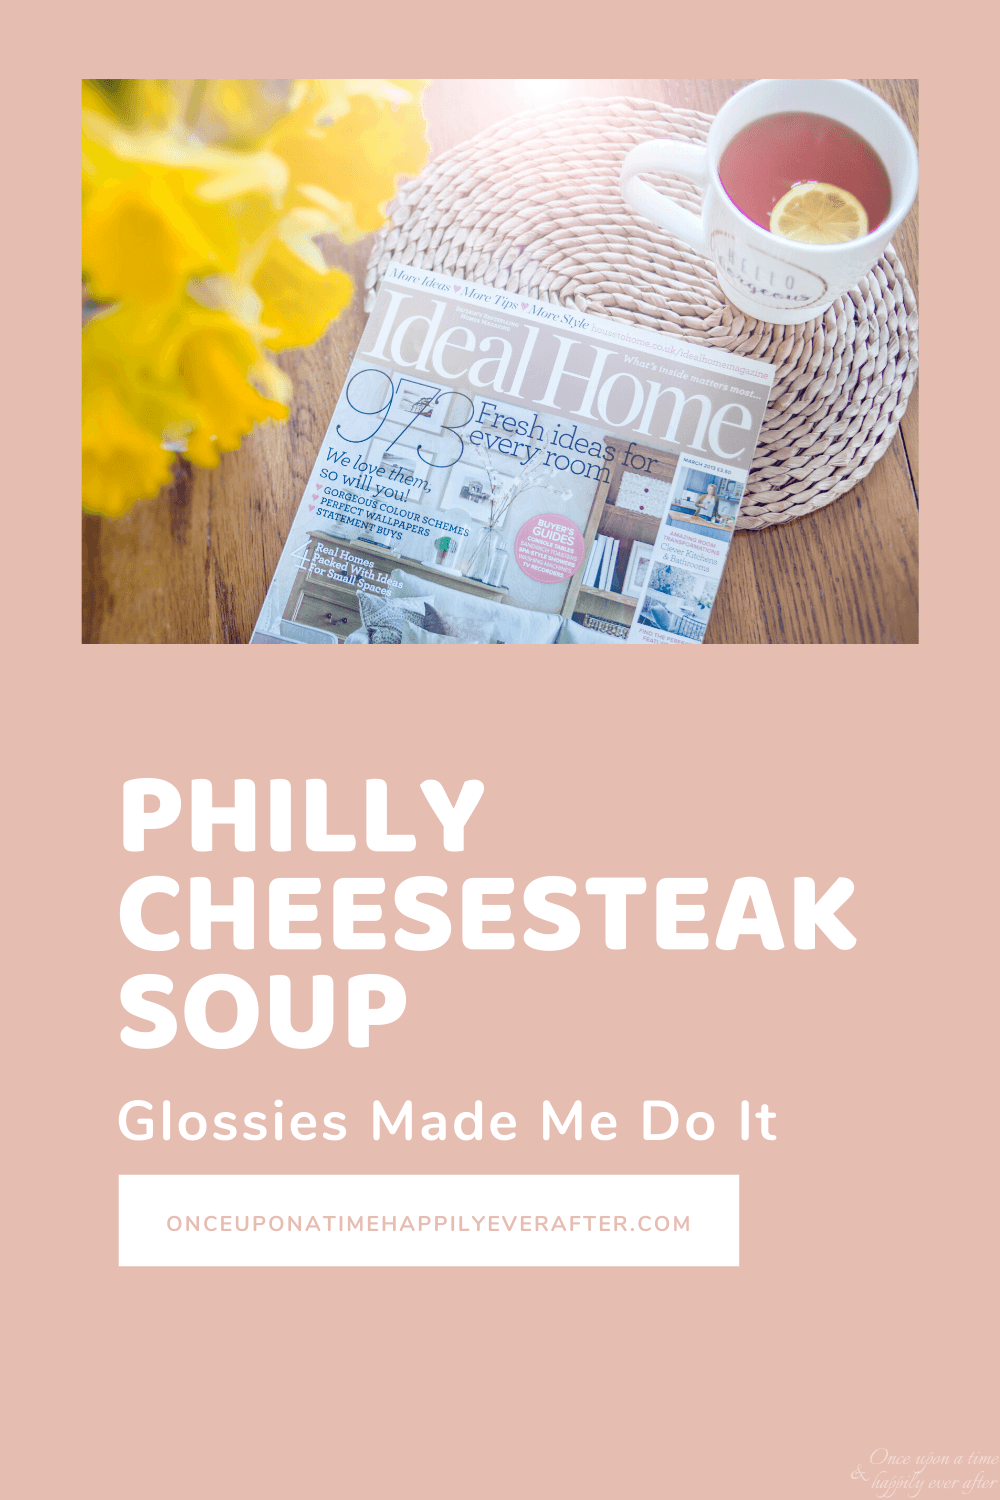 Philly Cheesesteak Soup: Glossies Made Me Do It